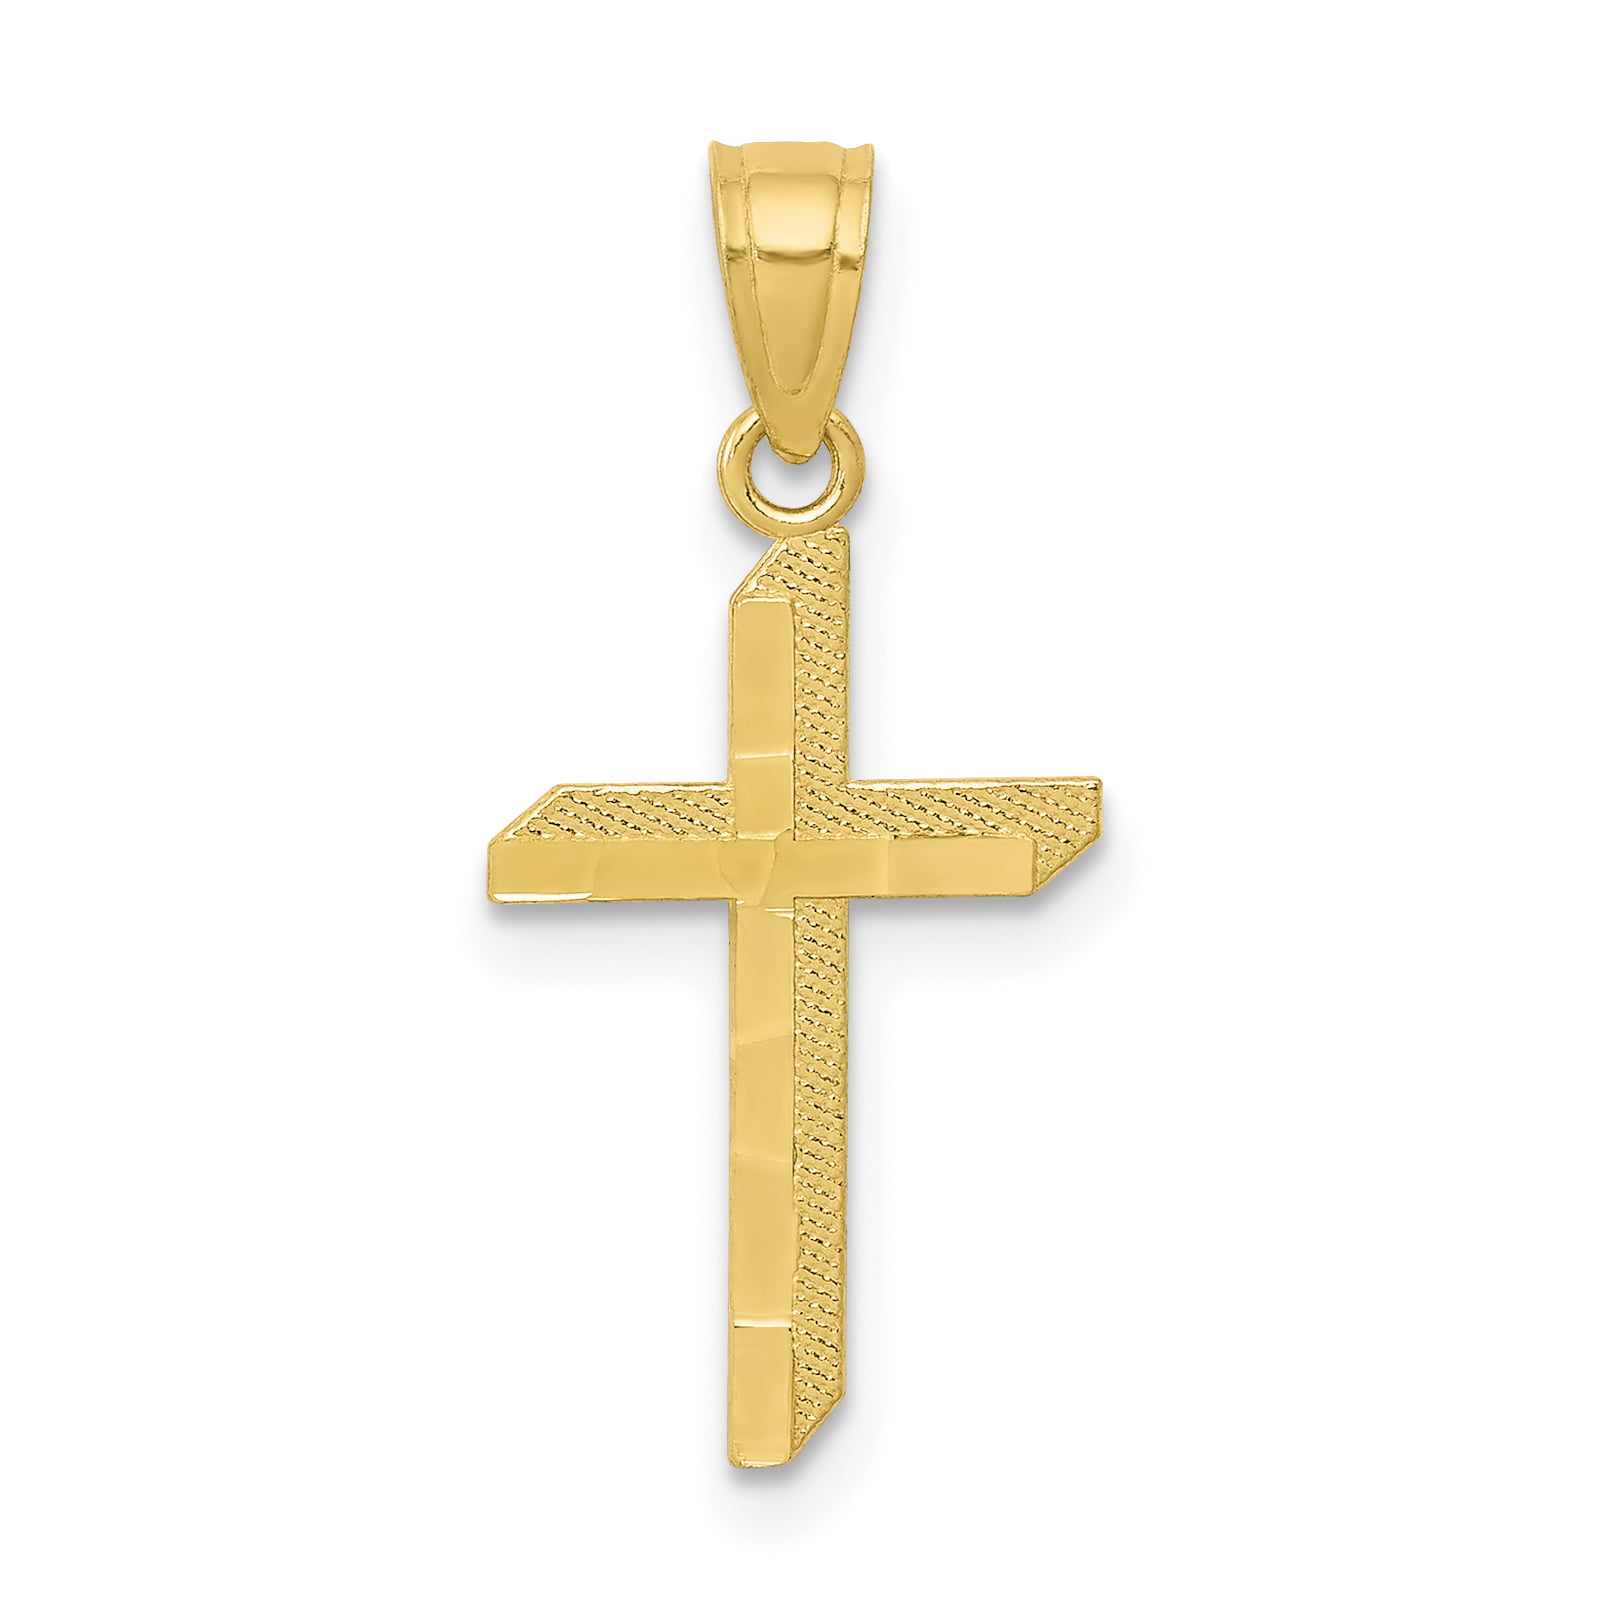 1.5 inches Solid 10k Yellow Gold Simple Cross Pendant Necklace